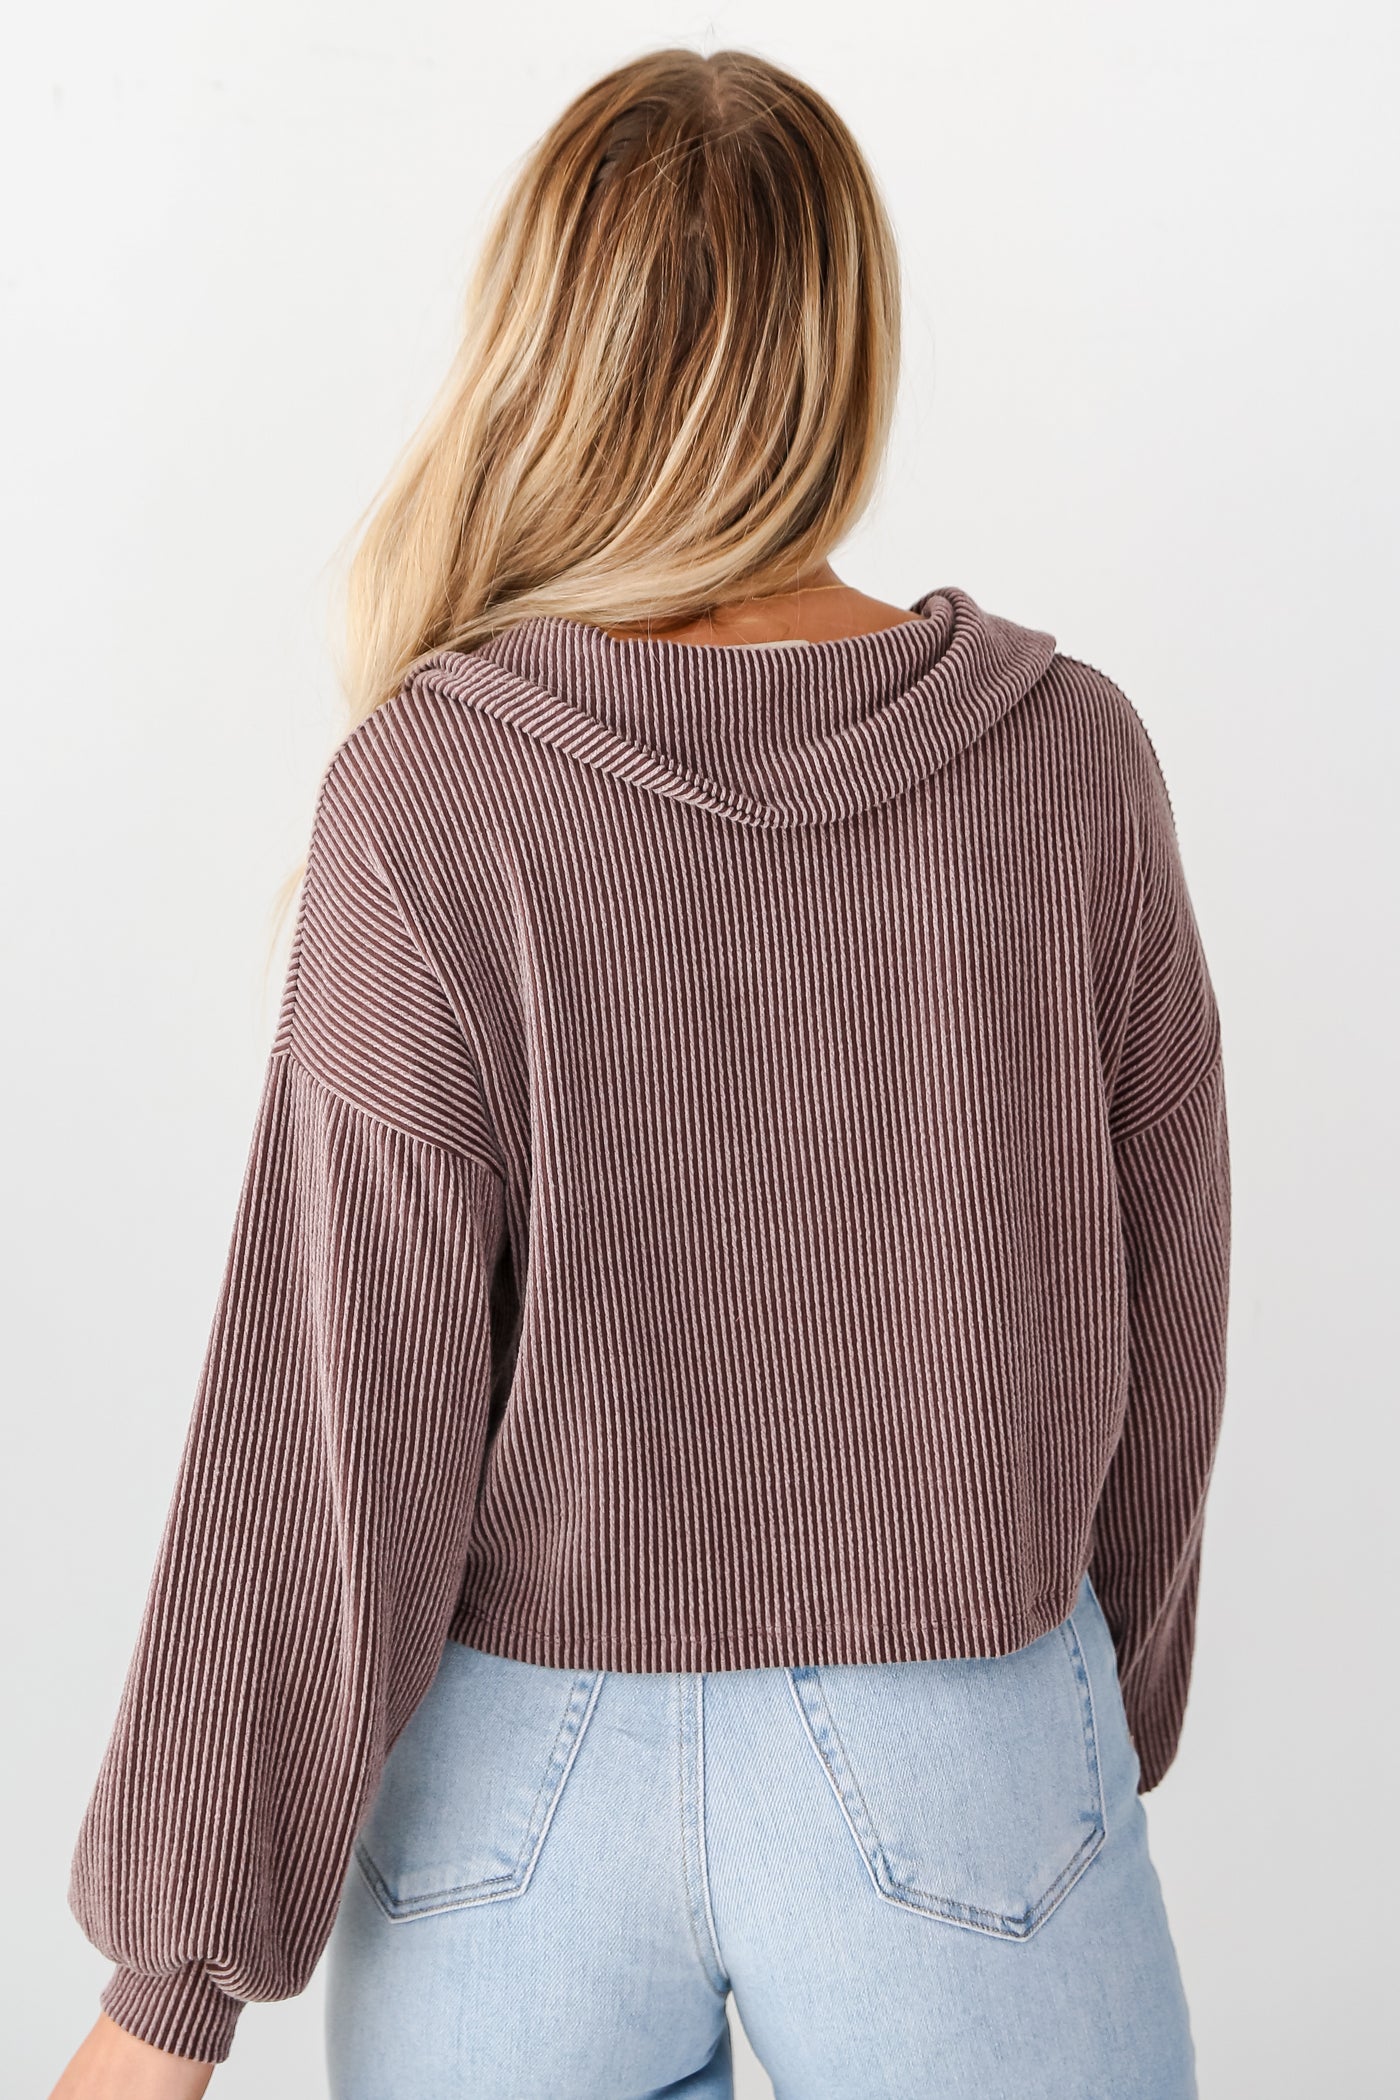 trendy corded knits